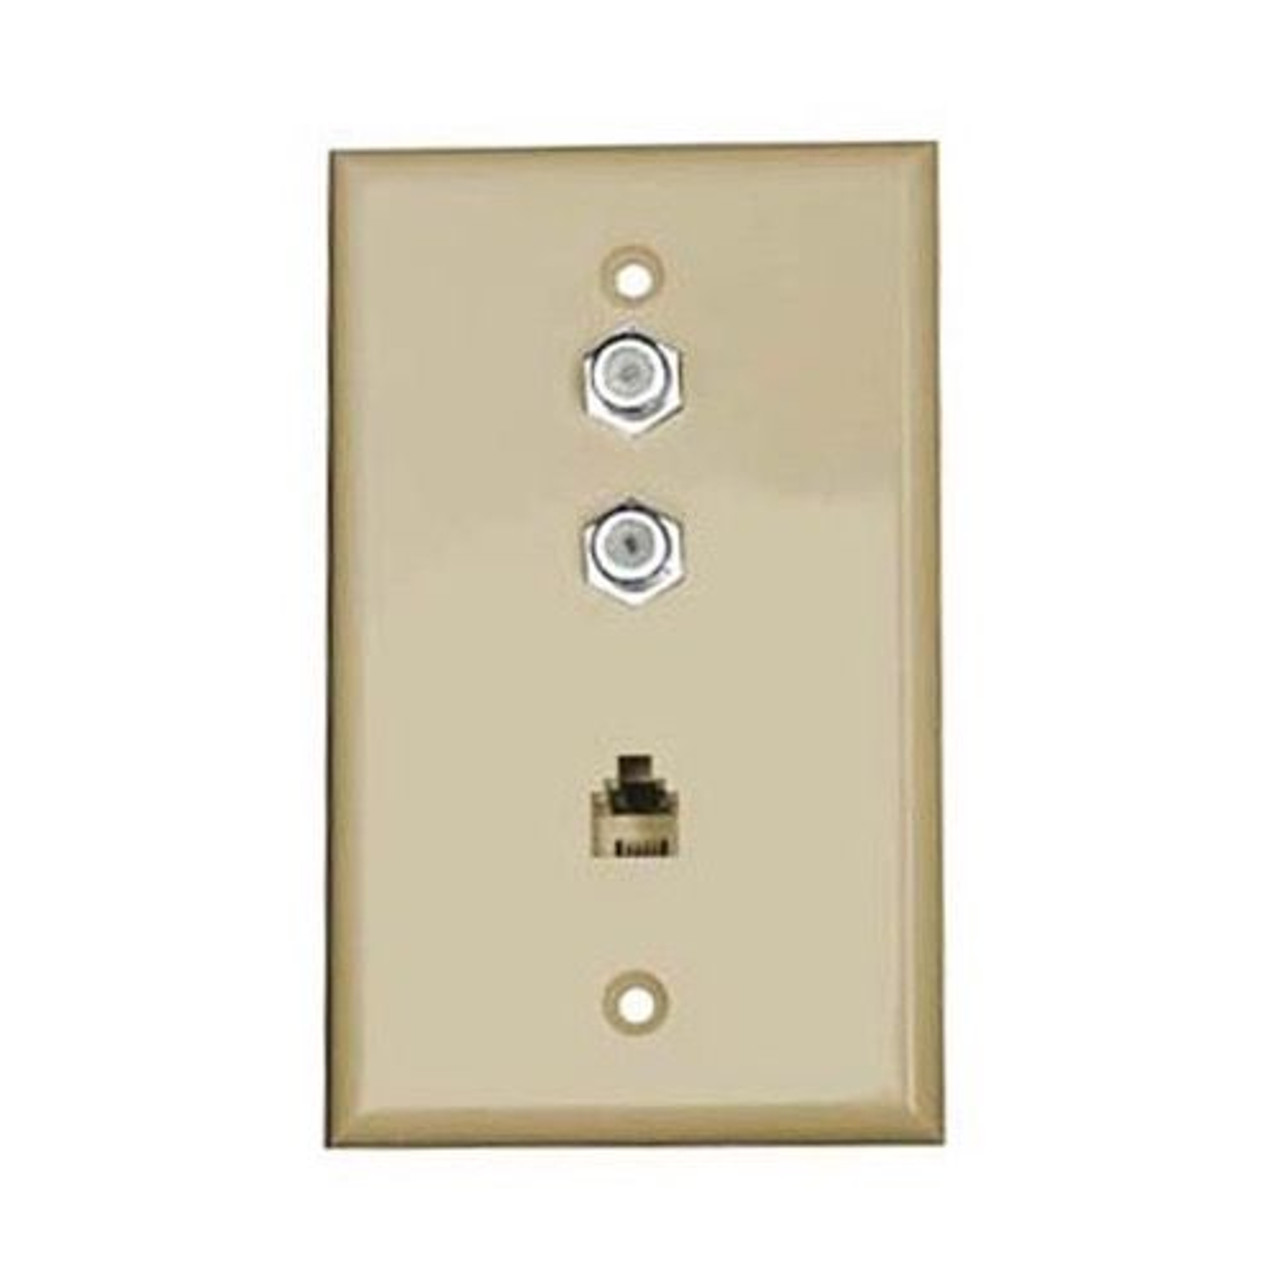 Perfect Dual F-81 Coax Wall Plate Phone Ivory RJ11 Connector 3 GHz Combo Modular Jack Aspen Telephone, TV Antenna Video Coaxial Cable Connectors, Part # CWP-501